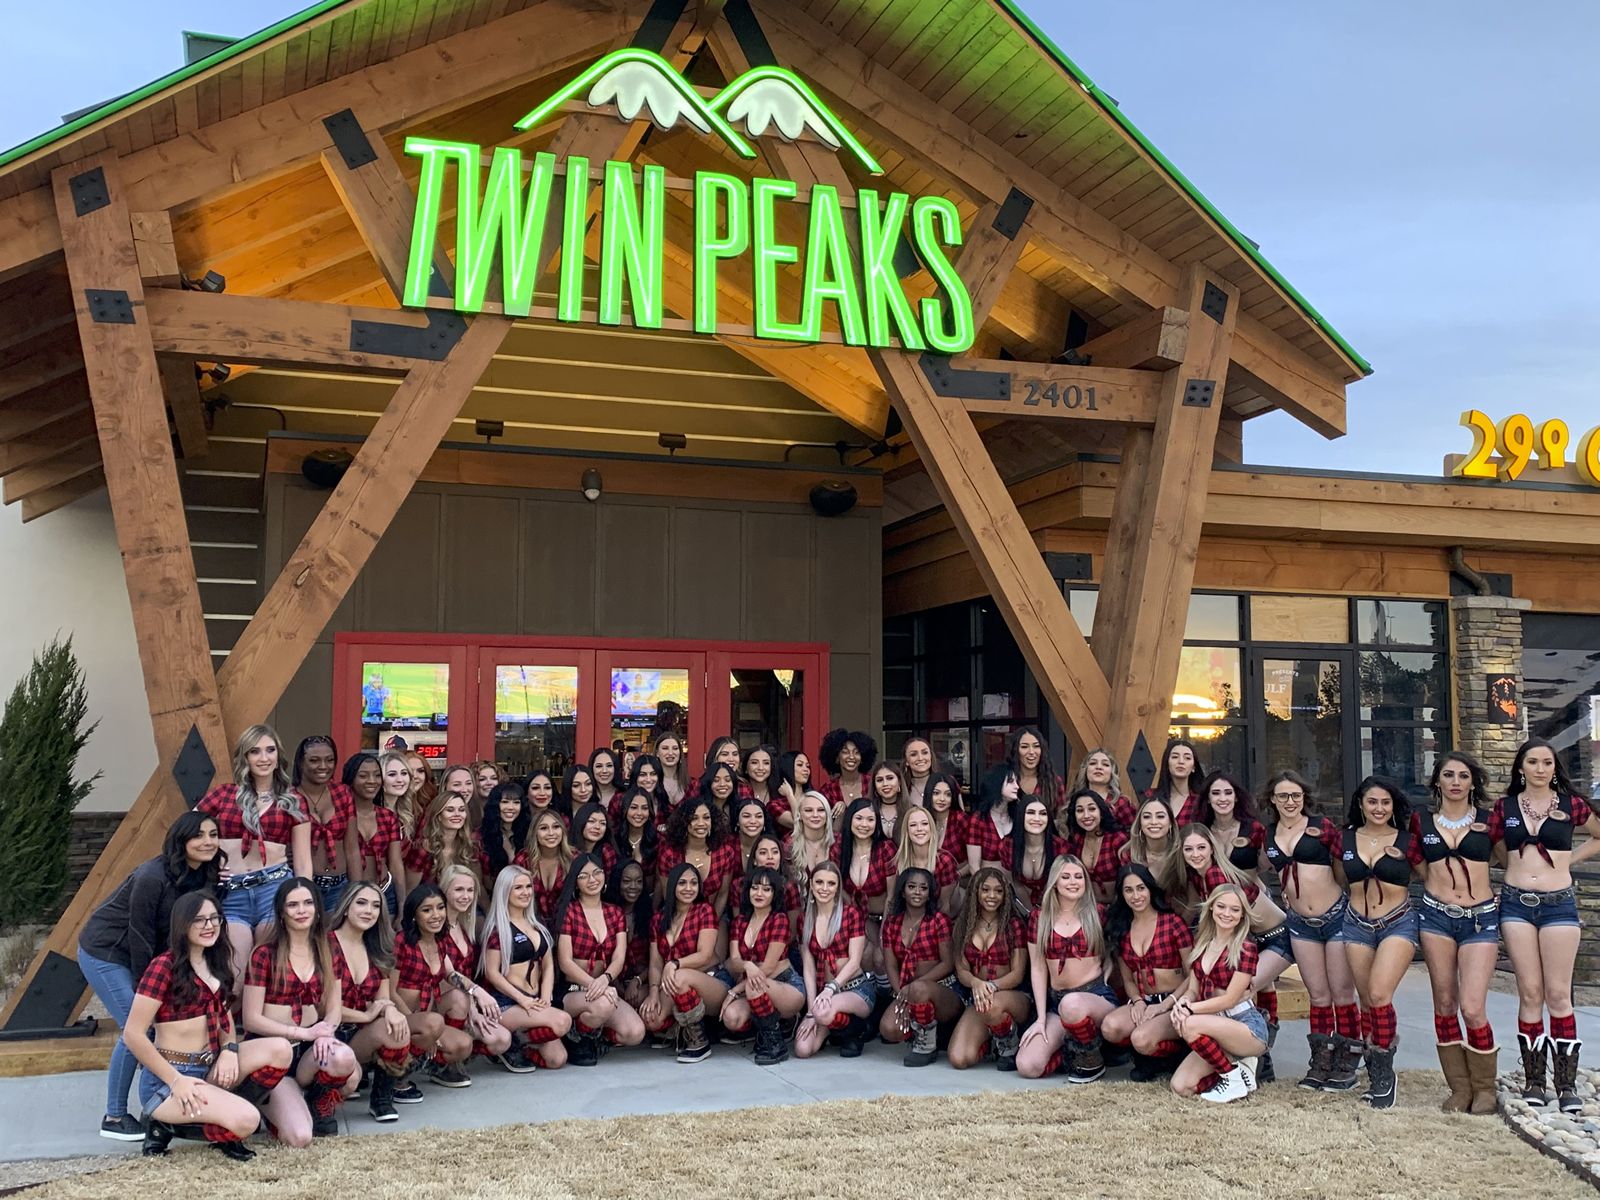 Twin Peaks Restaurant And Twin Peaks Girls in front of it smiling